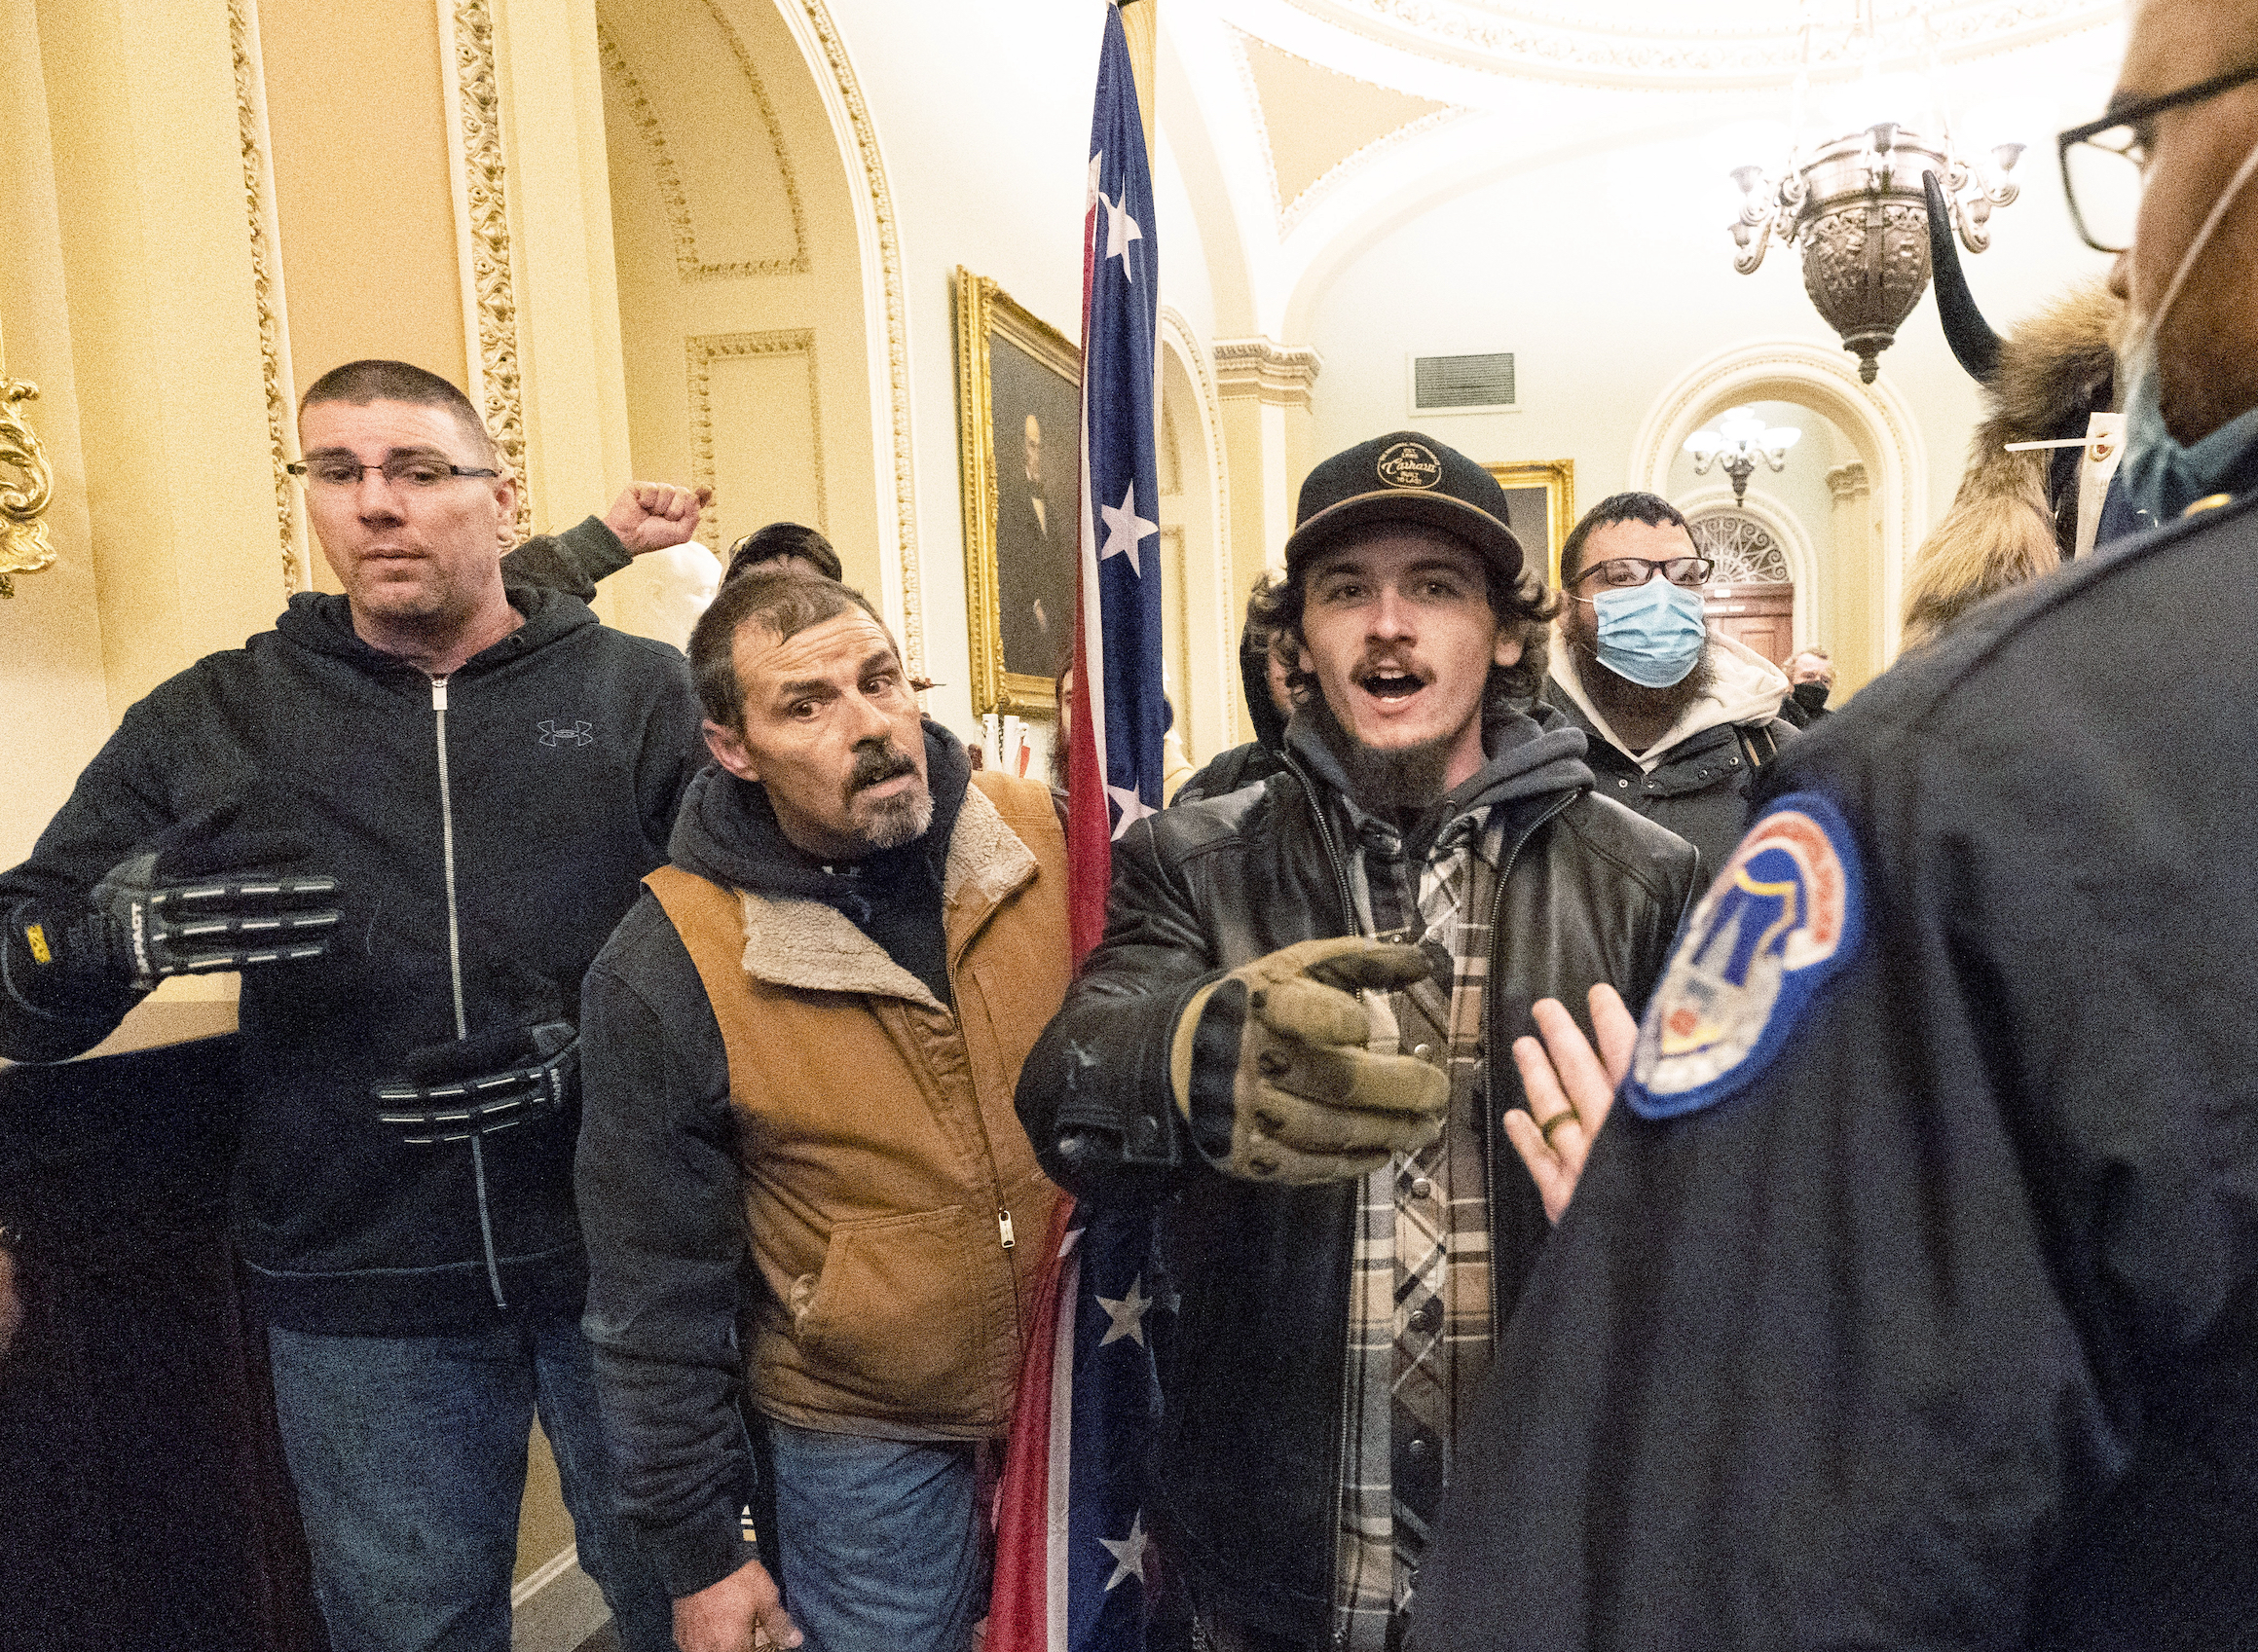 Protesters carrying a Confederate flag in the U.S. Capitol